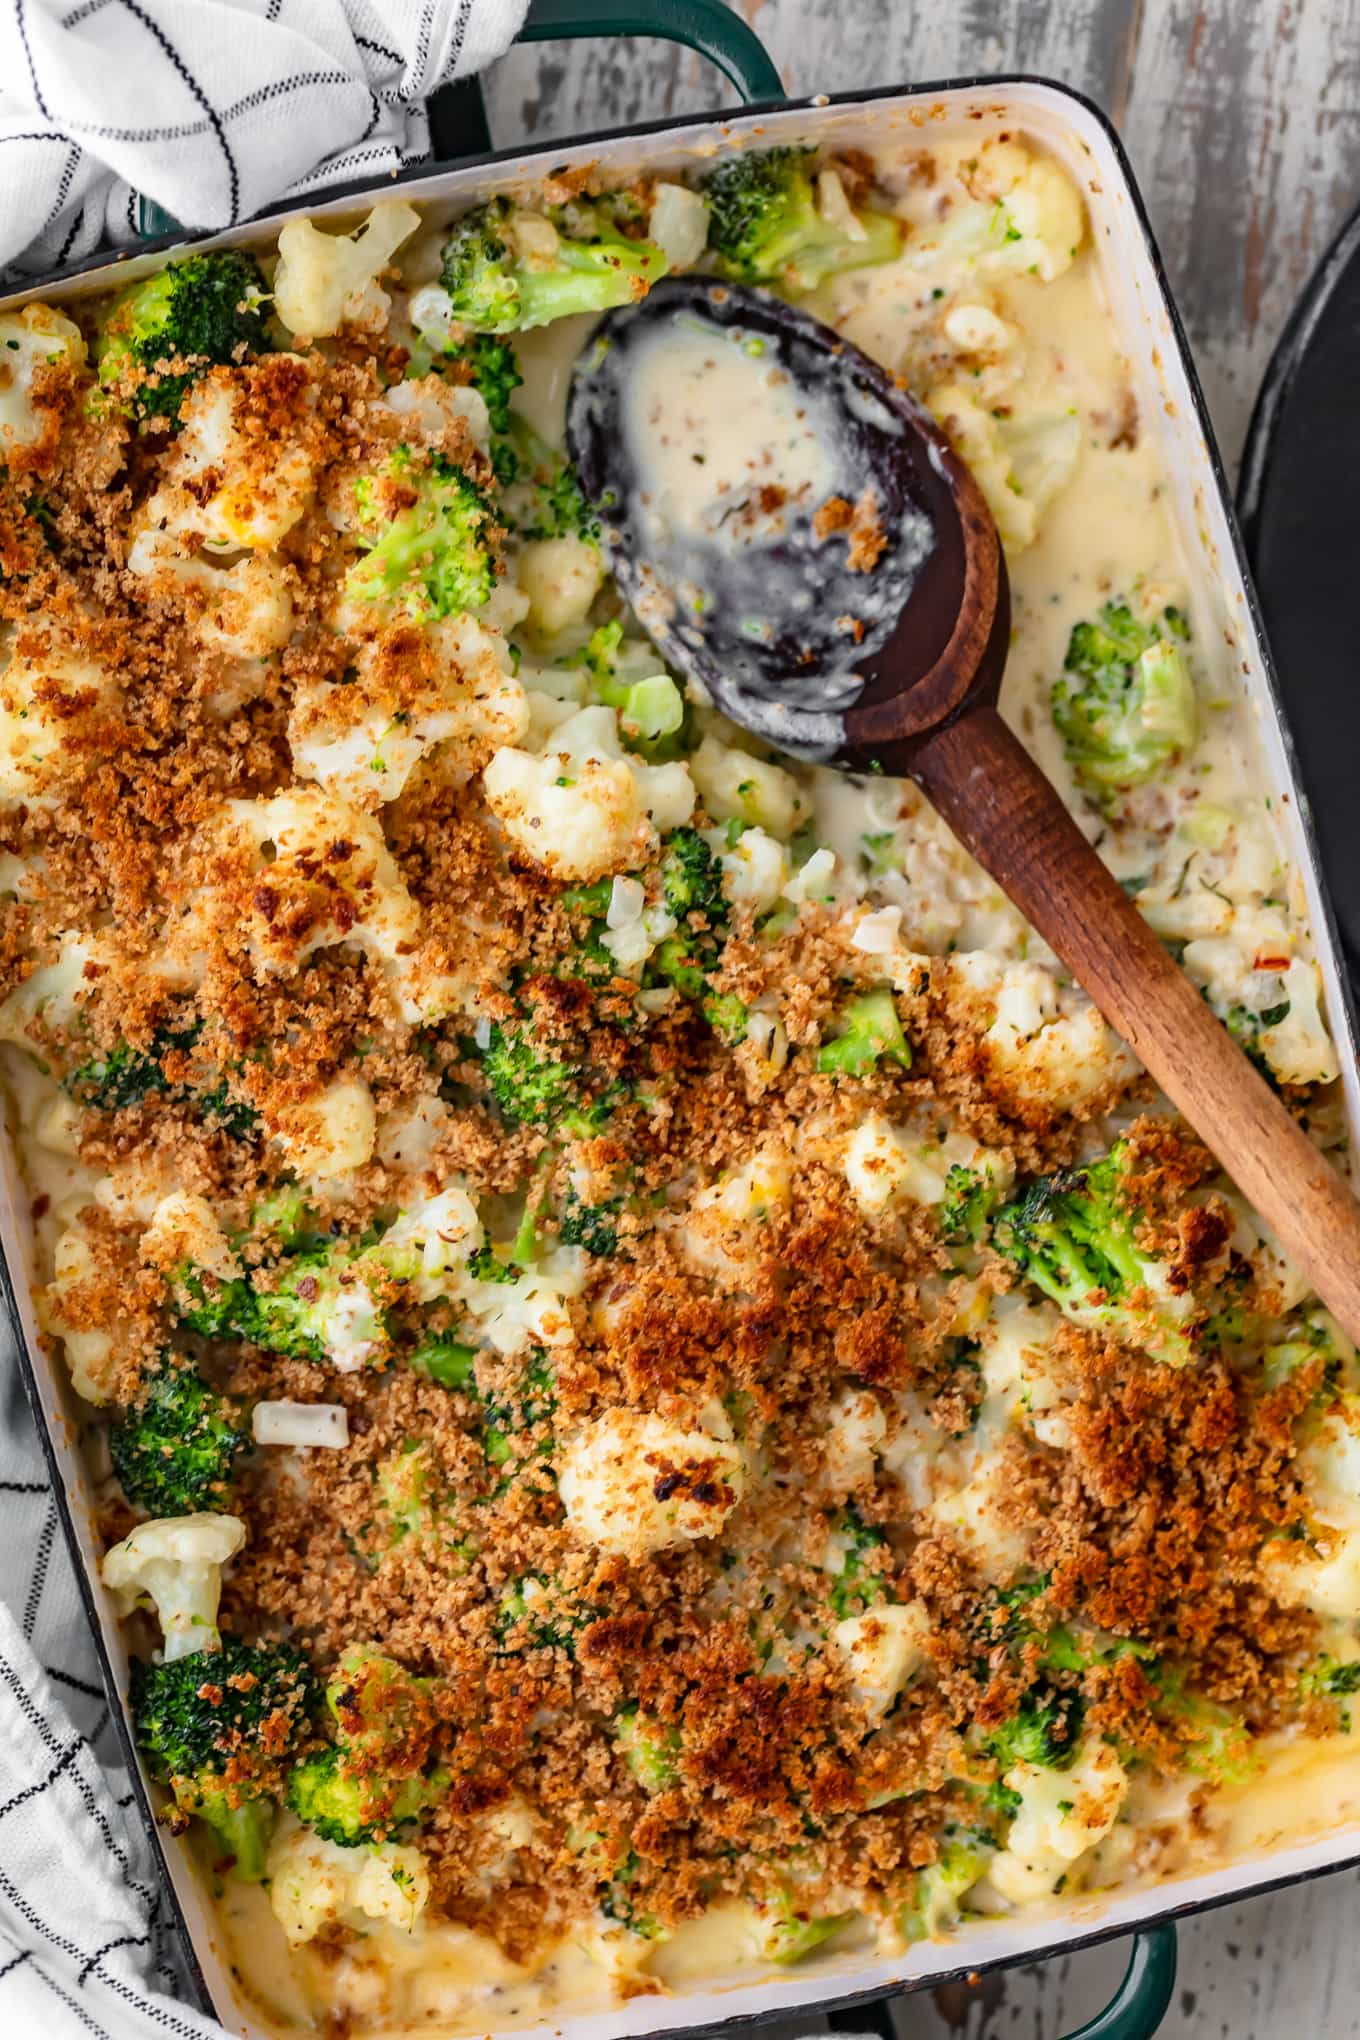 casserole dish filled with cauliflower and broccoli with a bread crumb topping